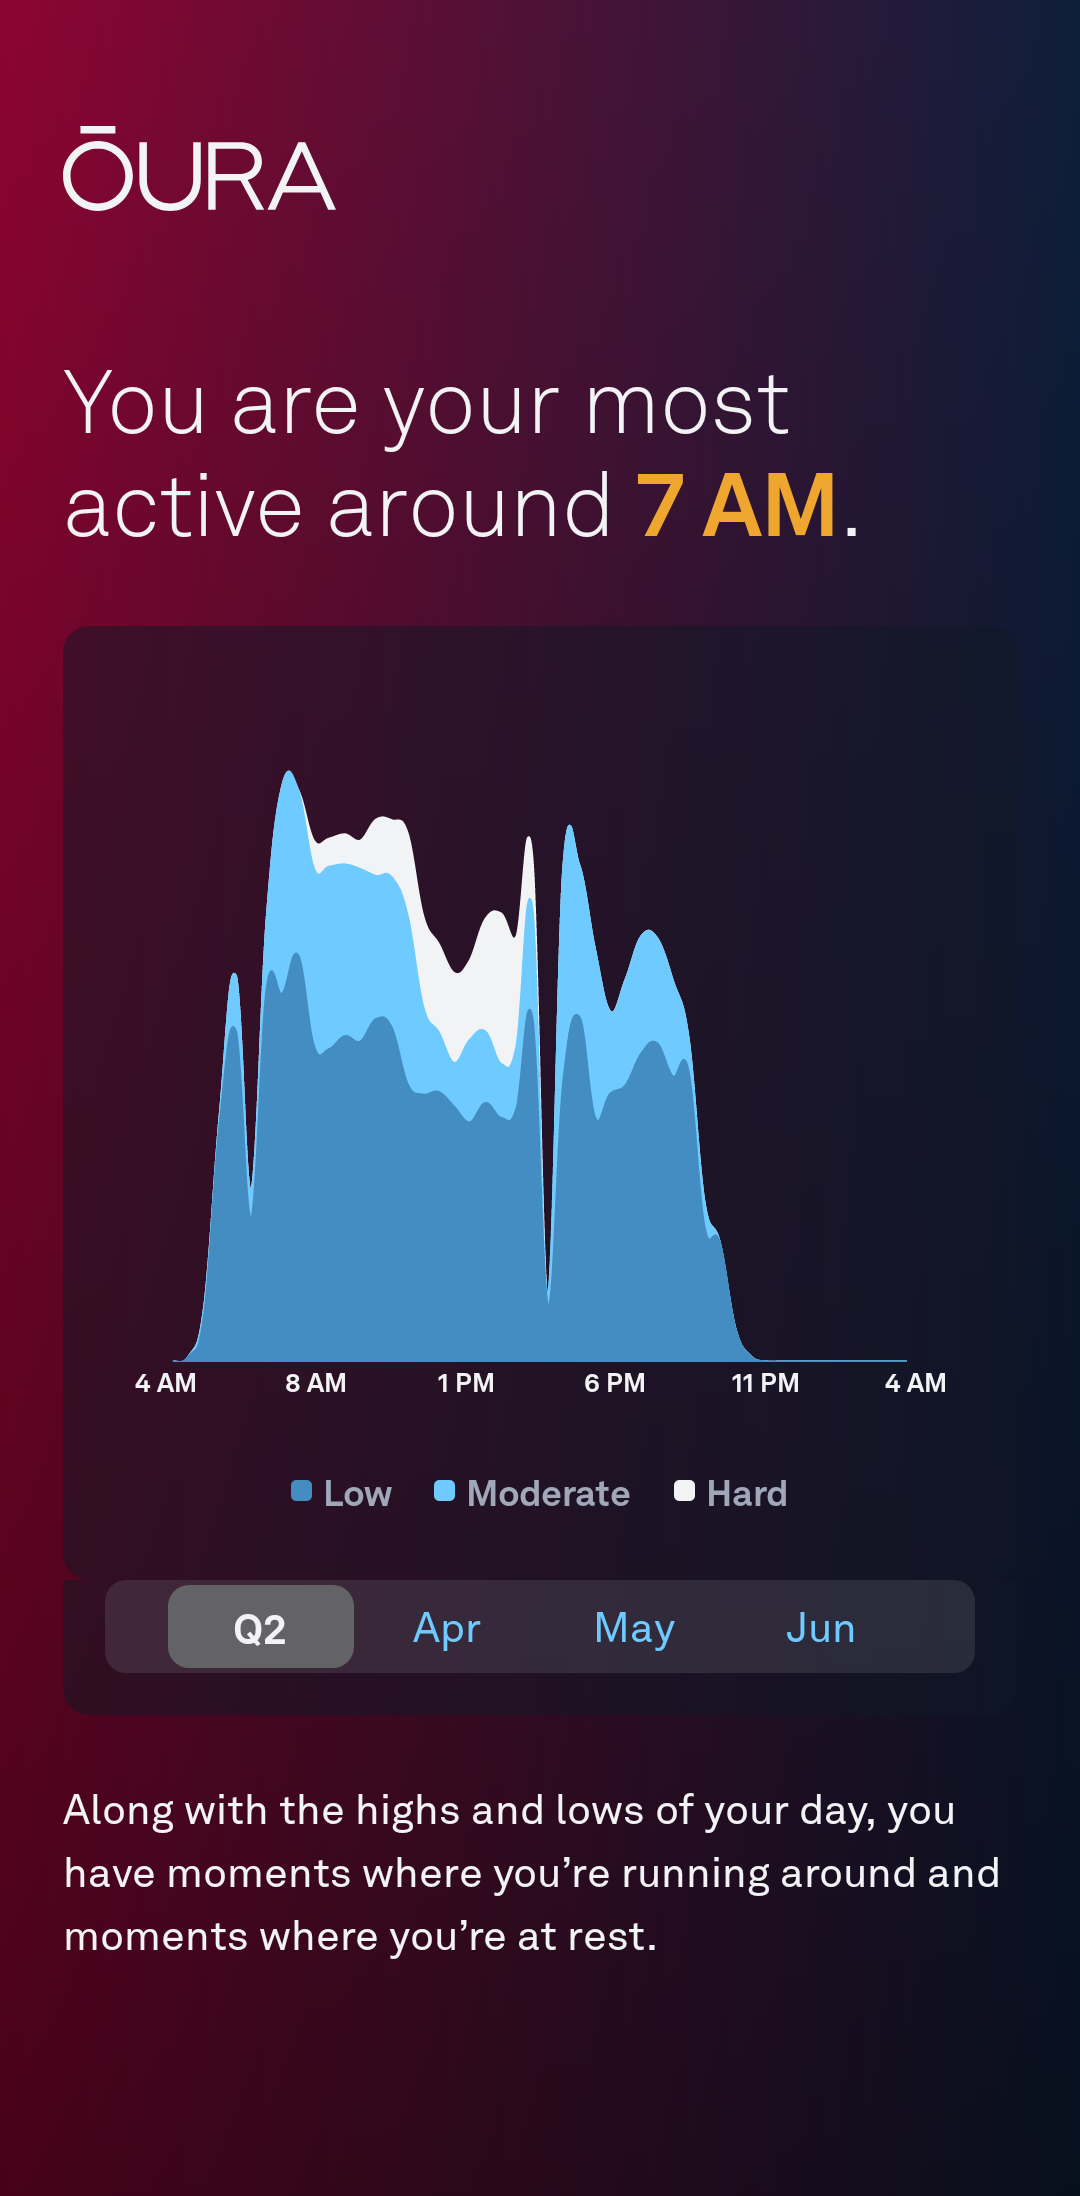 Graph of Oura ring data showing my activity through the day, with the highst peak at 7:00 AM